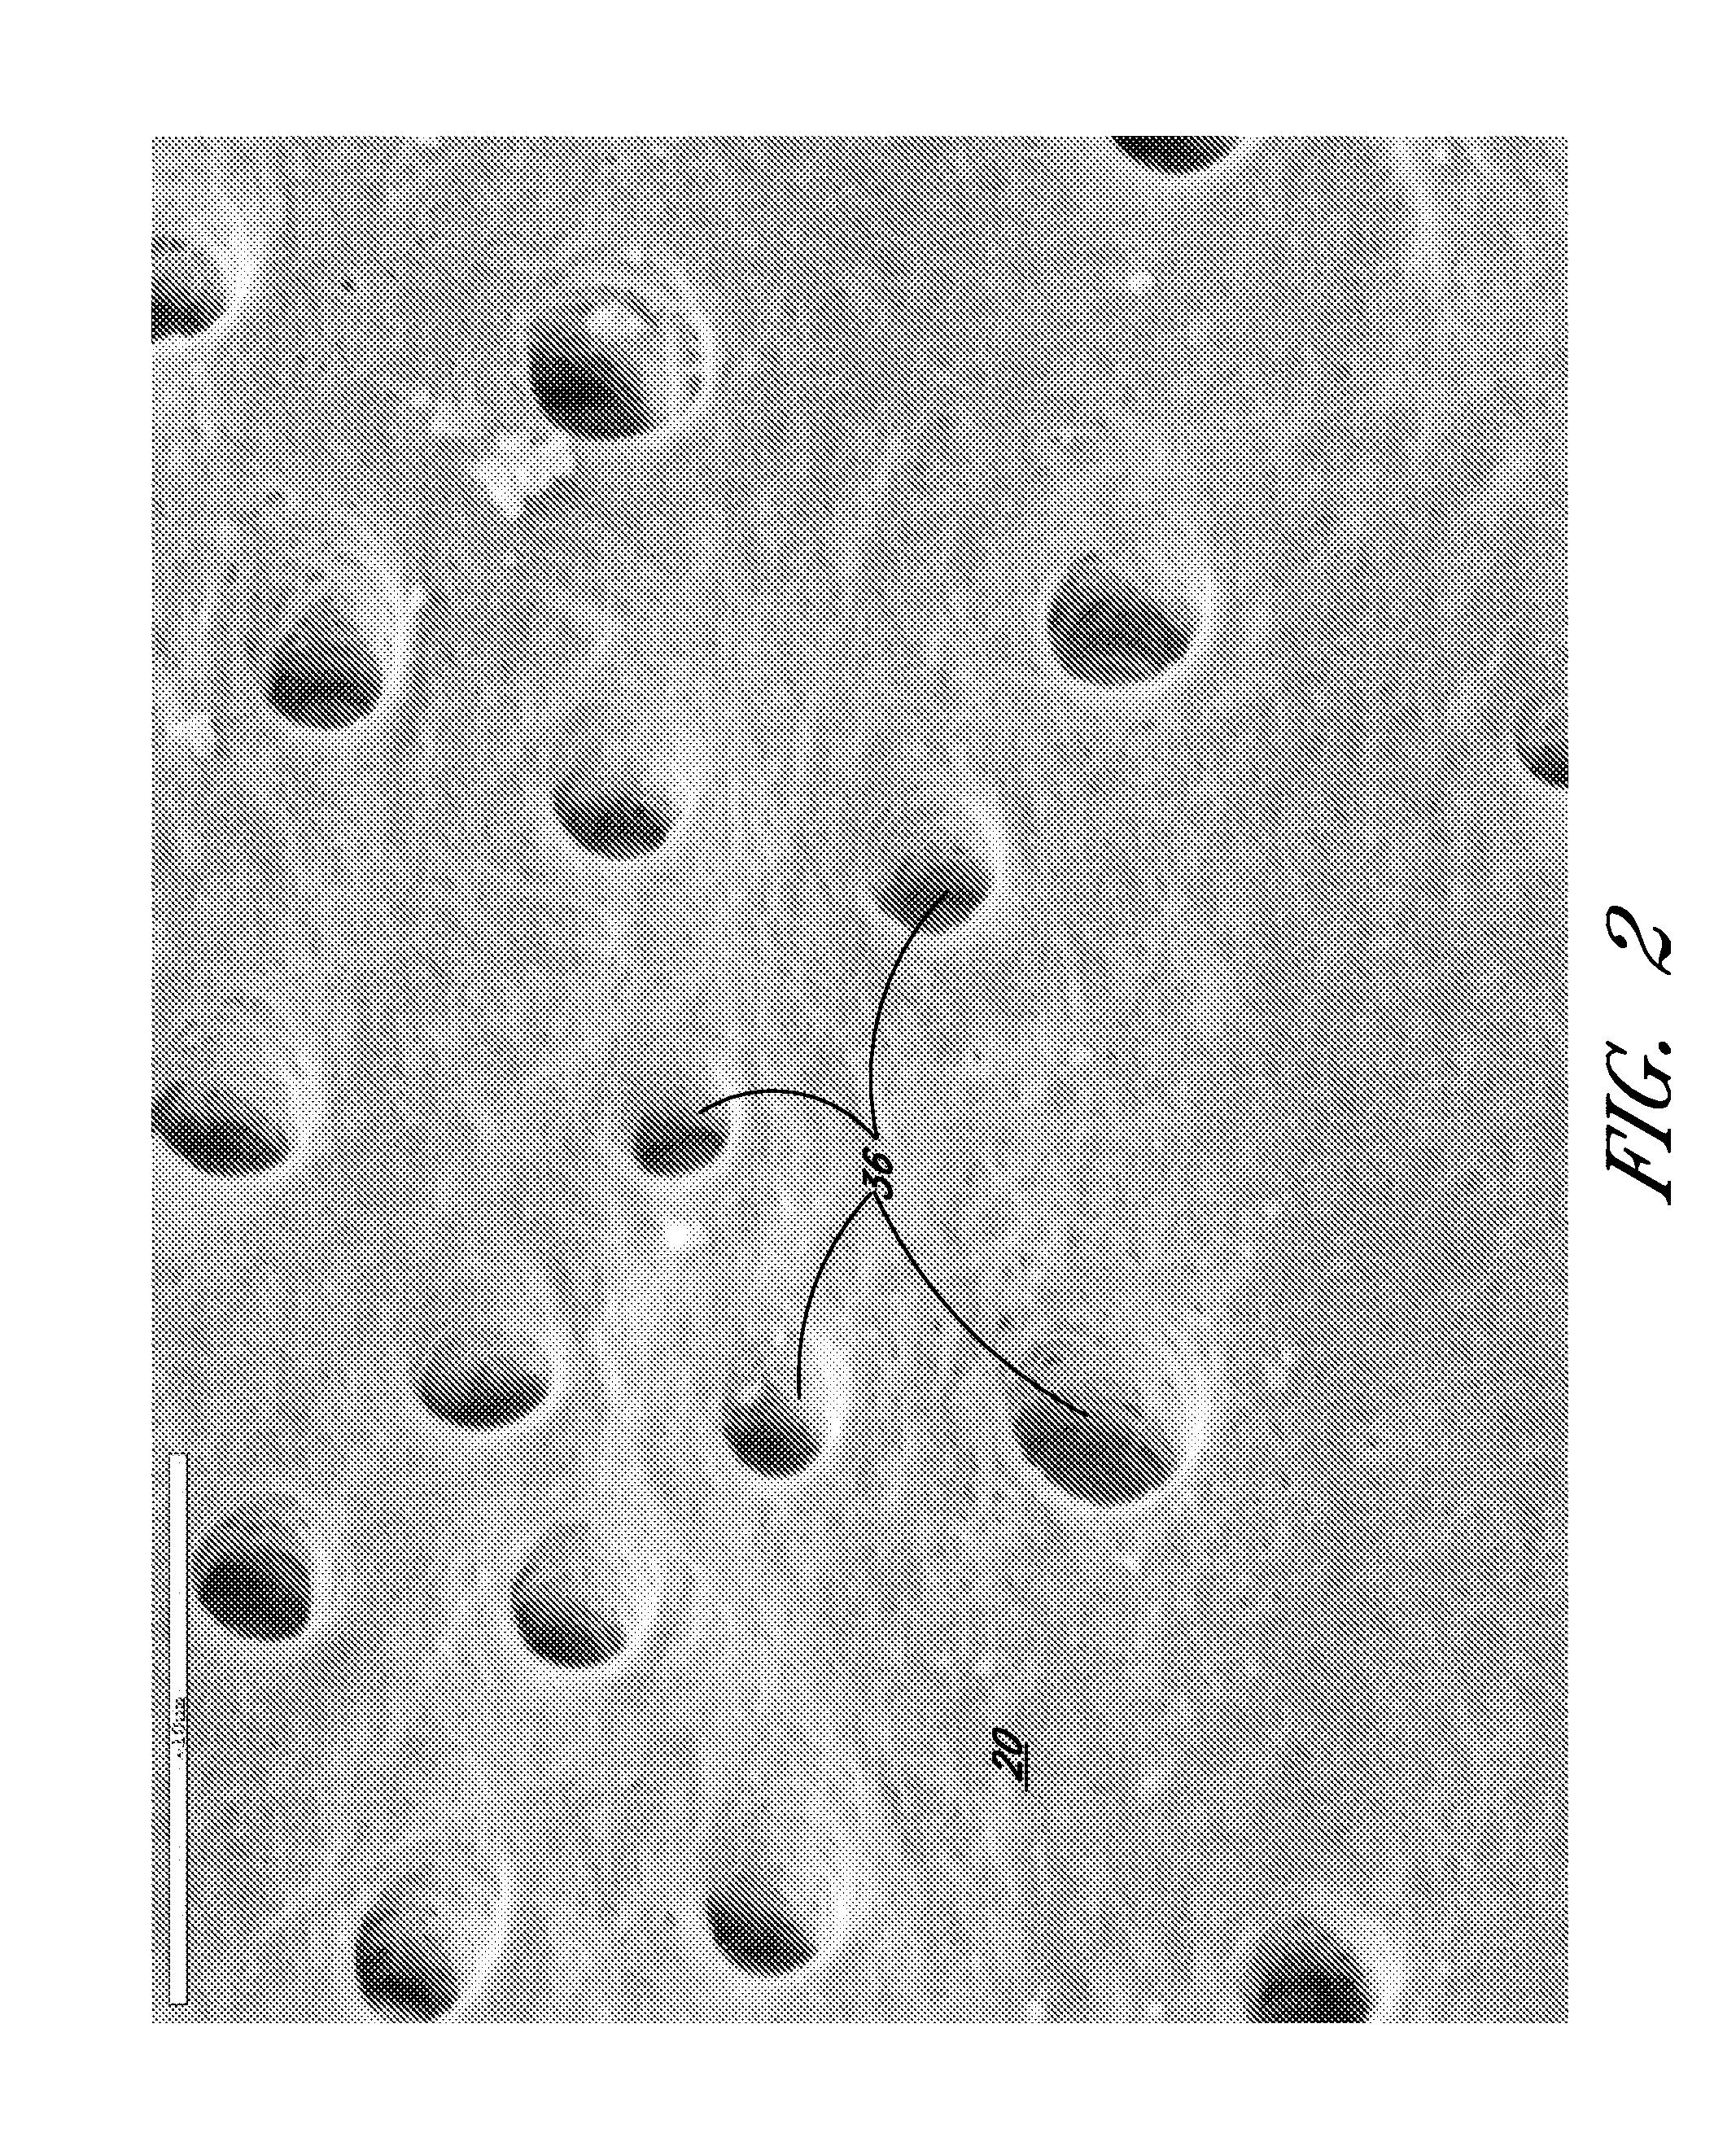 Apparatus and methods for monitoring a tooth